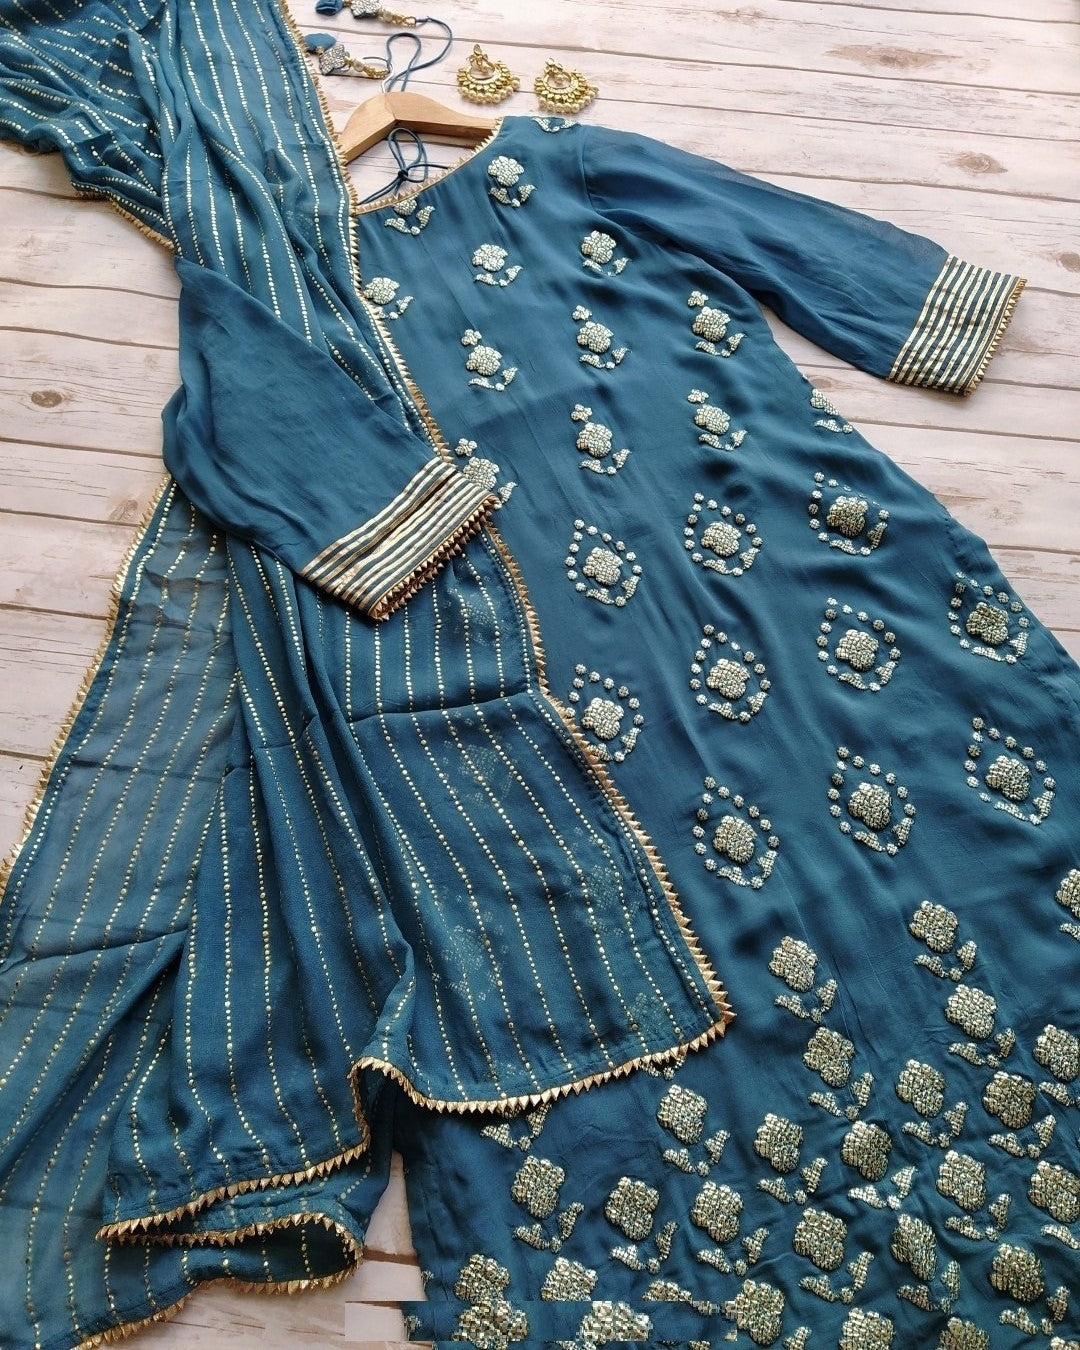 Rama Blue Salwar Suit In Georgette With Mukaish Work